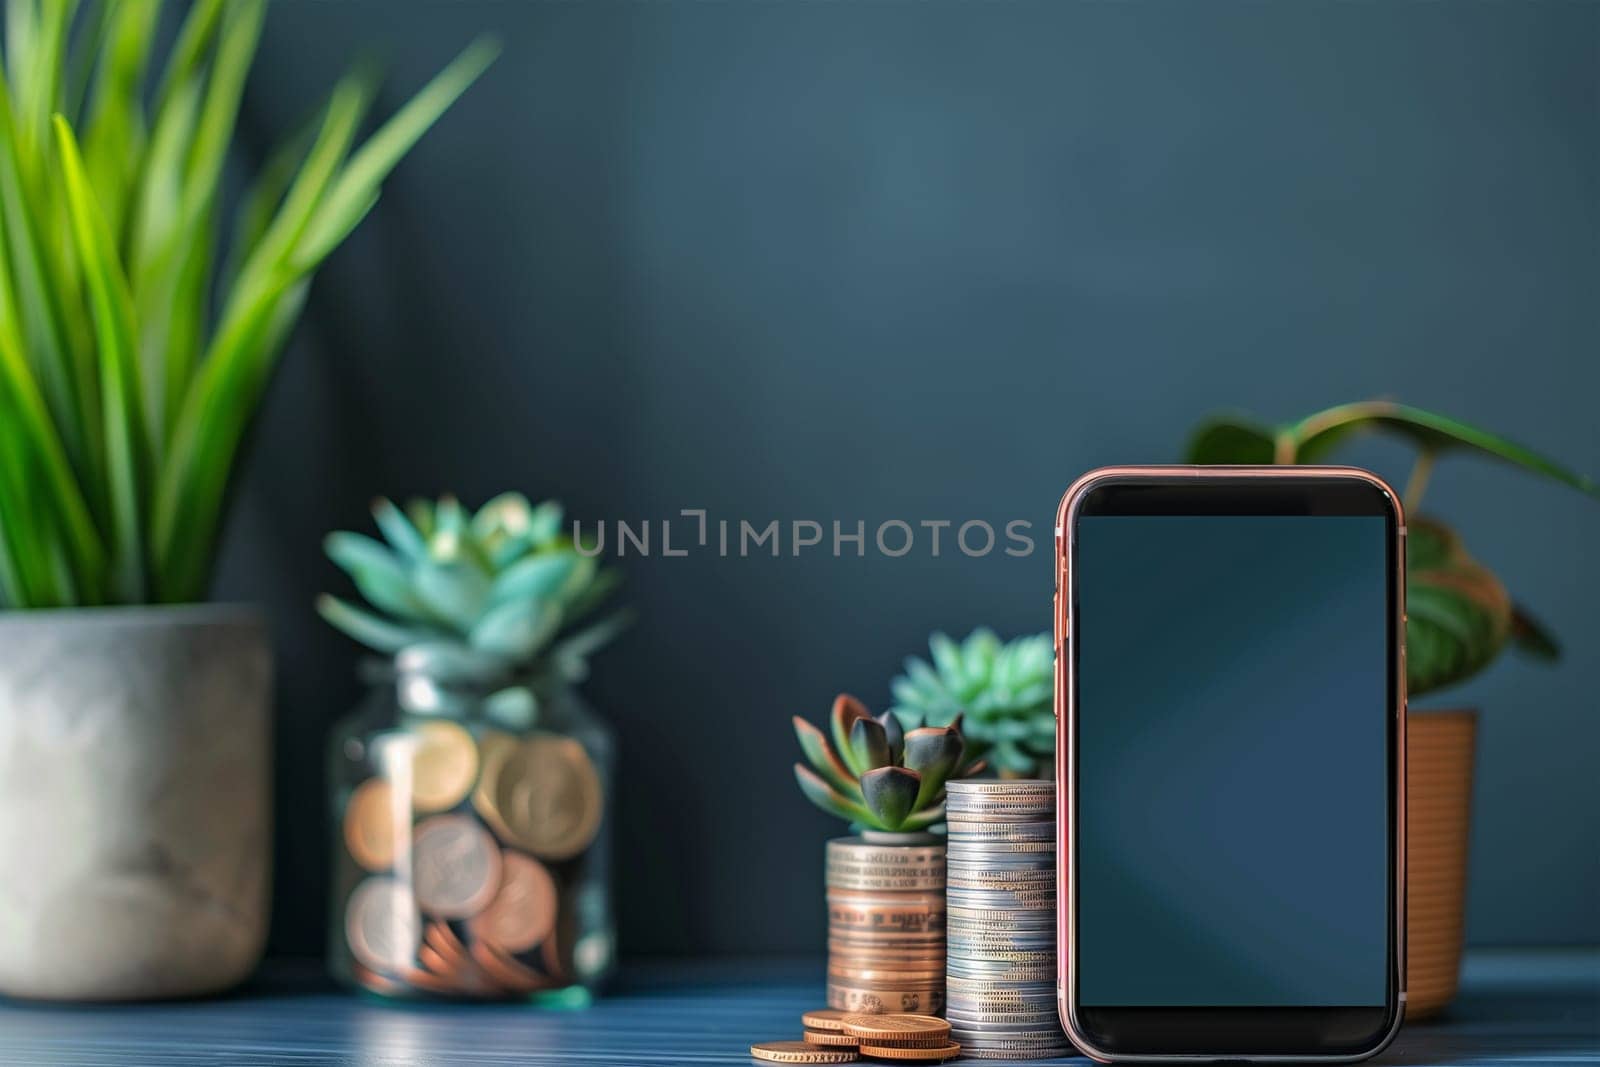 Smartphone, Coins, and Plant on Table by Sd28DimoN_1976